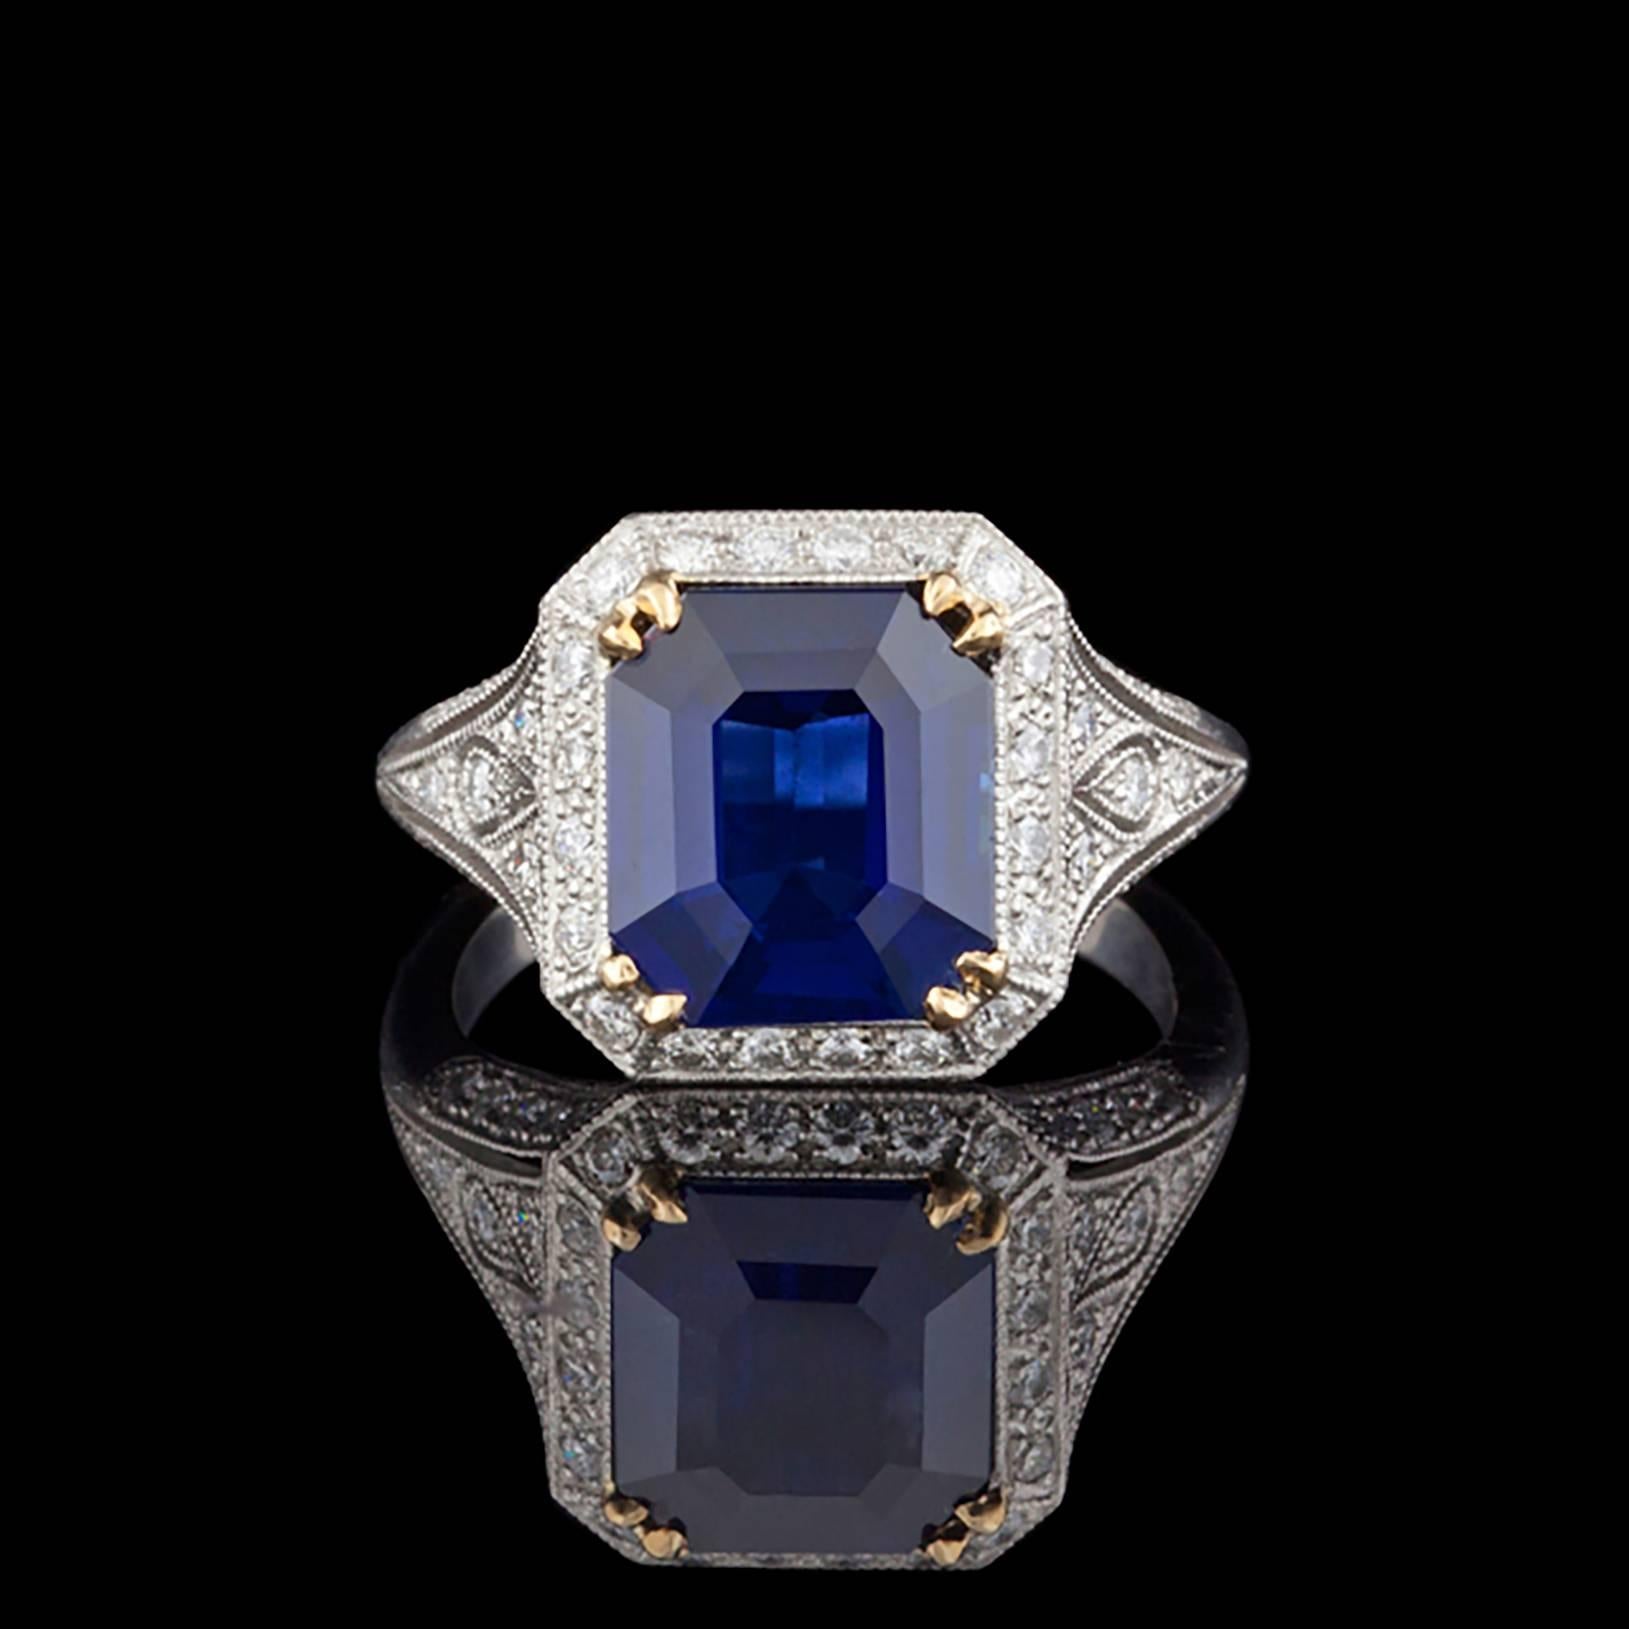 Fabulous platinum ring by French designer Sebastien Barier features one Octagonal Emerald Cut Natural Blue Sapphire for a total weight of 4.31cts accented by approximately 0.68cts of Round Brilliant Cut Diamonds. The total weight of this exquisite